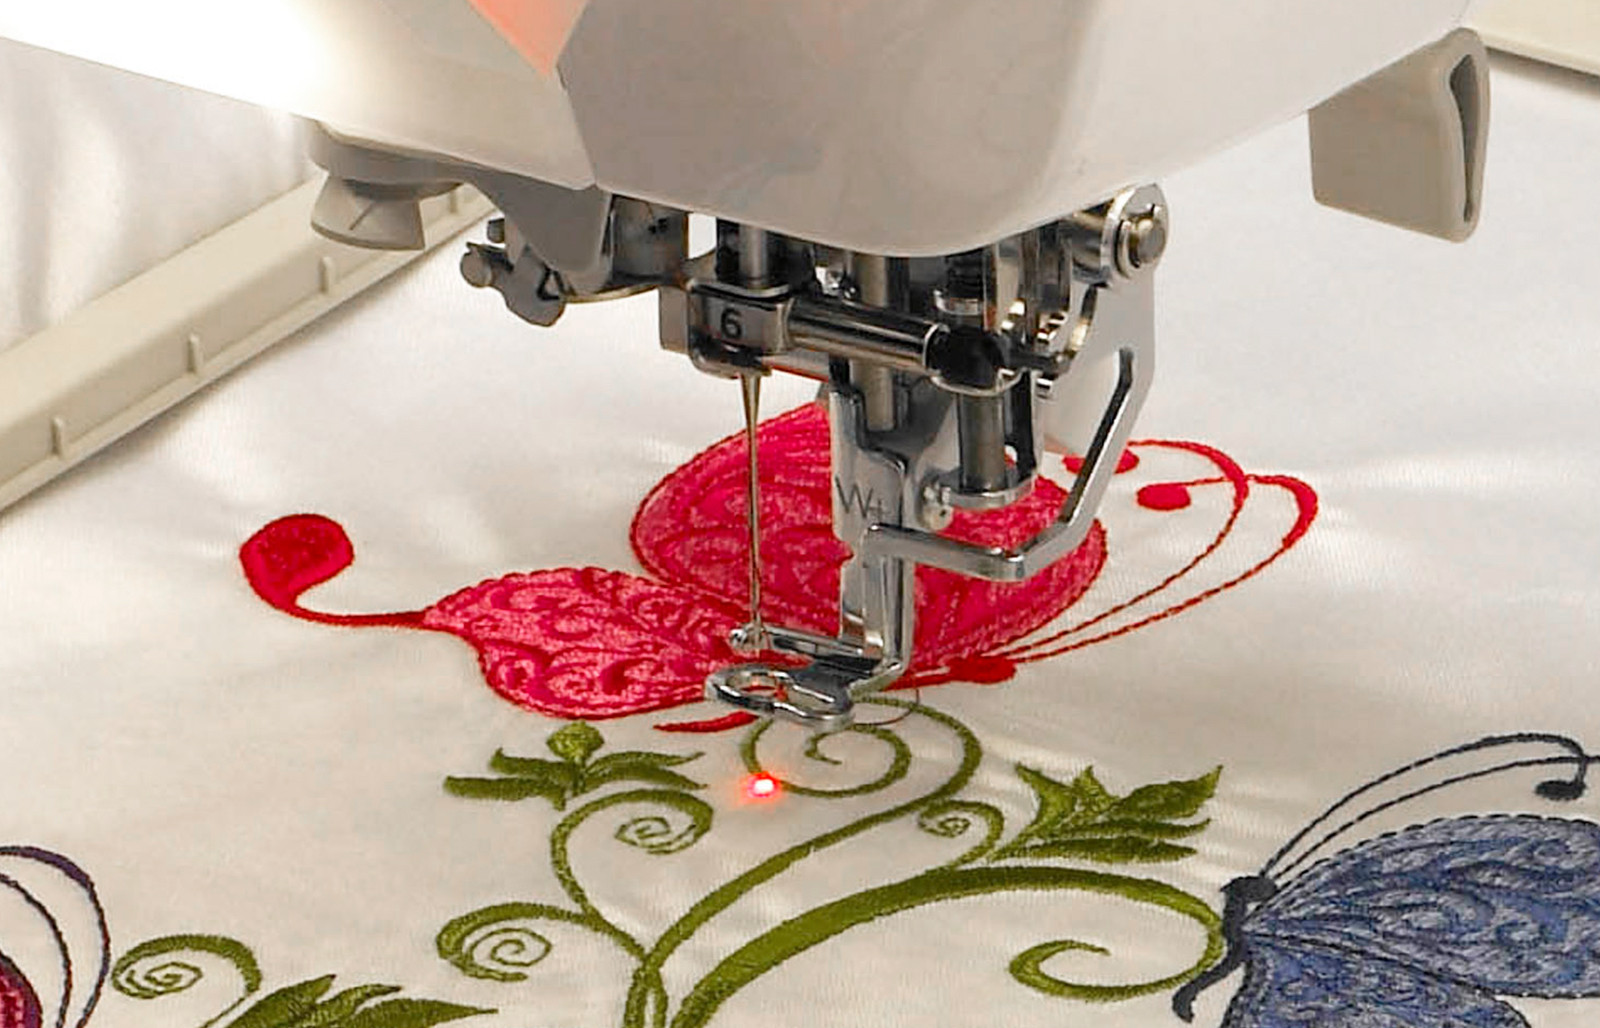 A close up photo of an embroidery machine with needle beam in action over flower and butterfly design